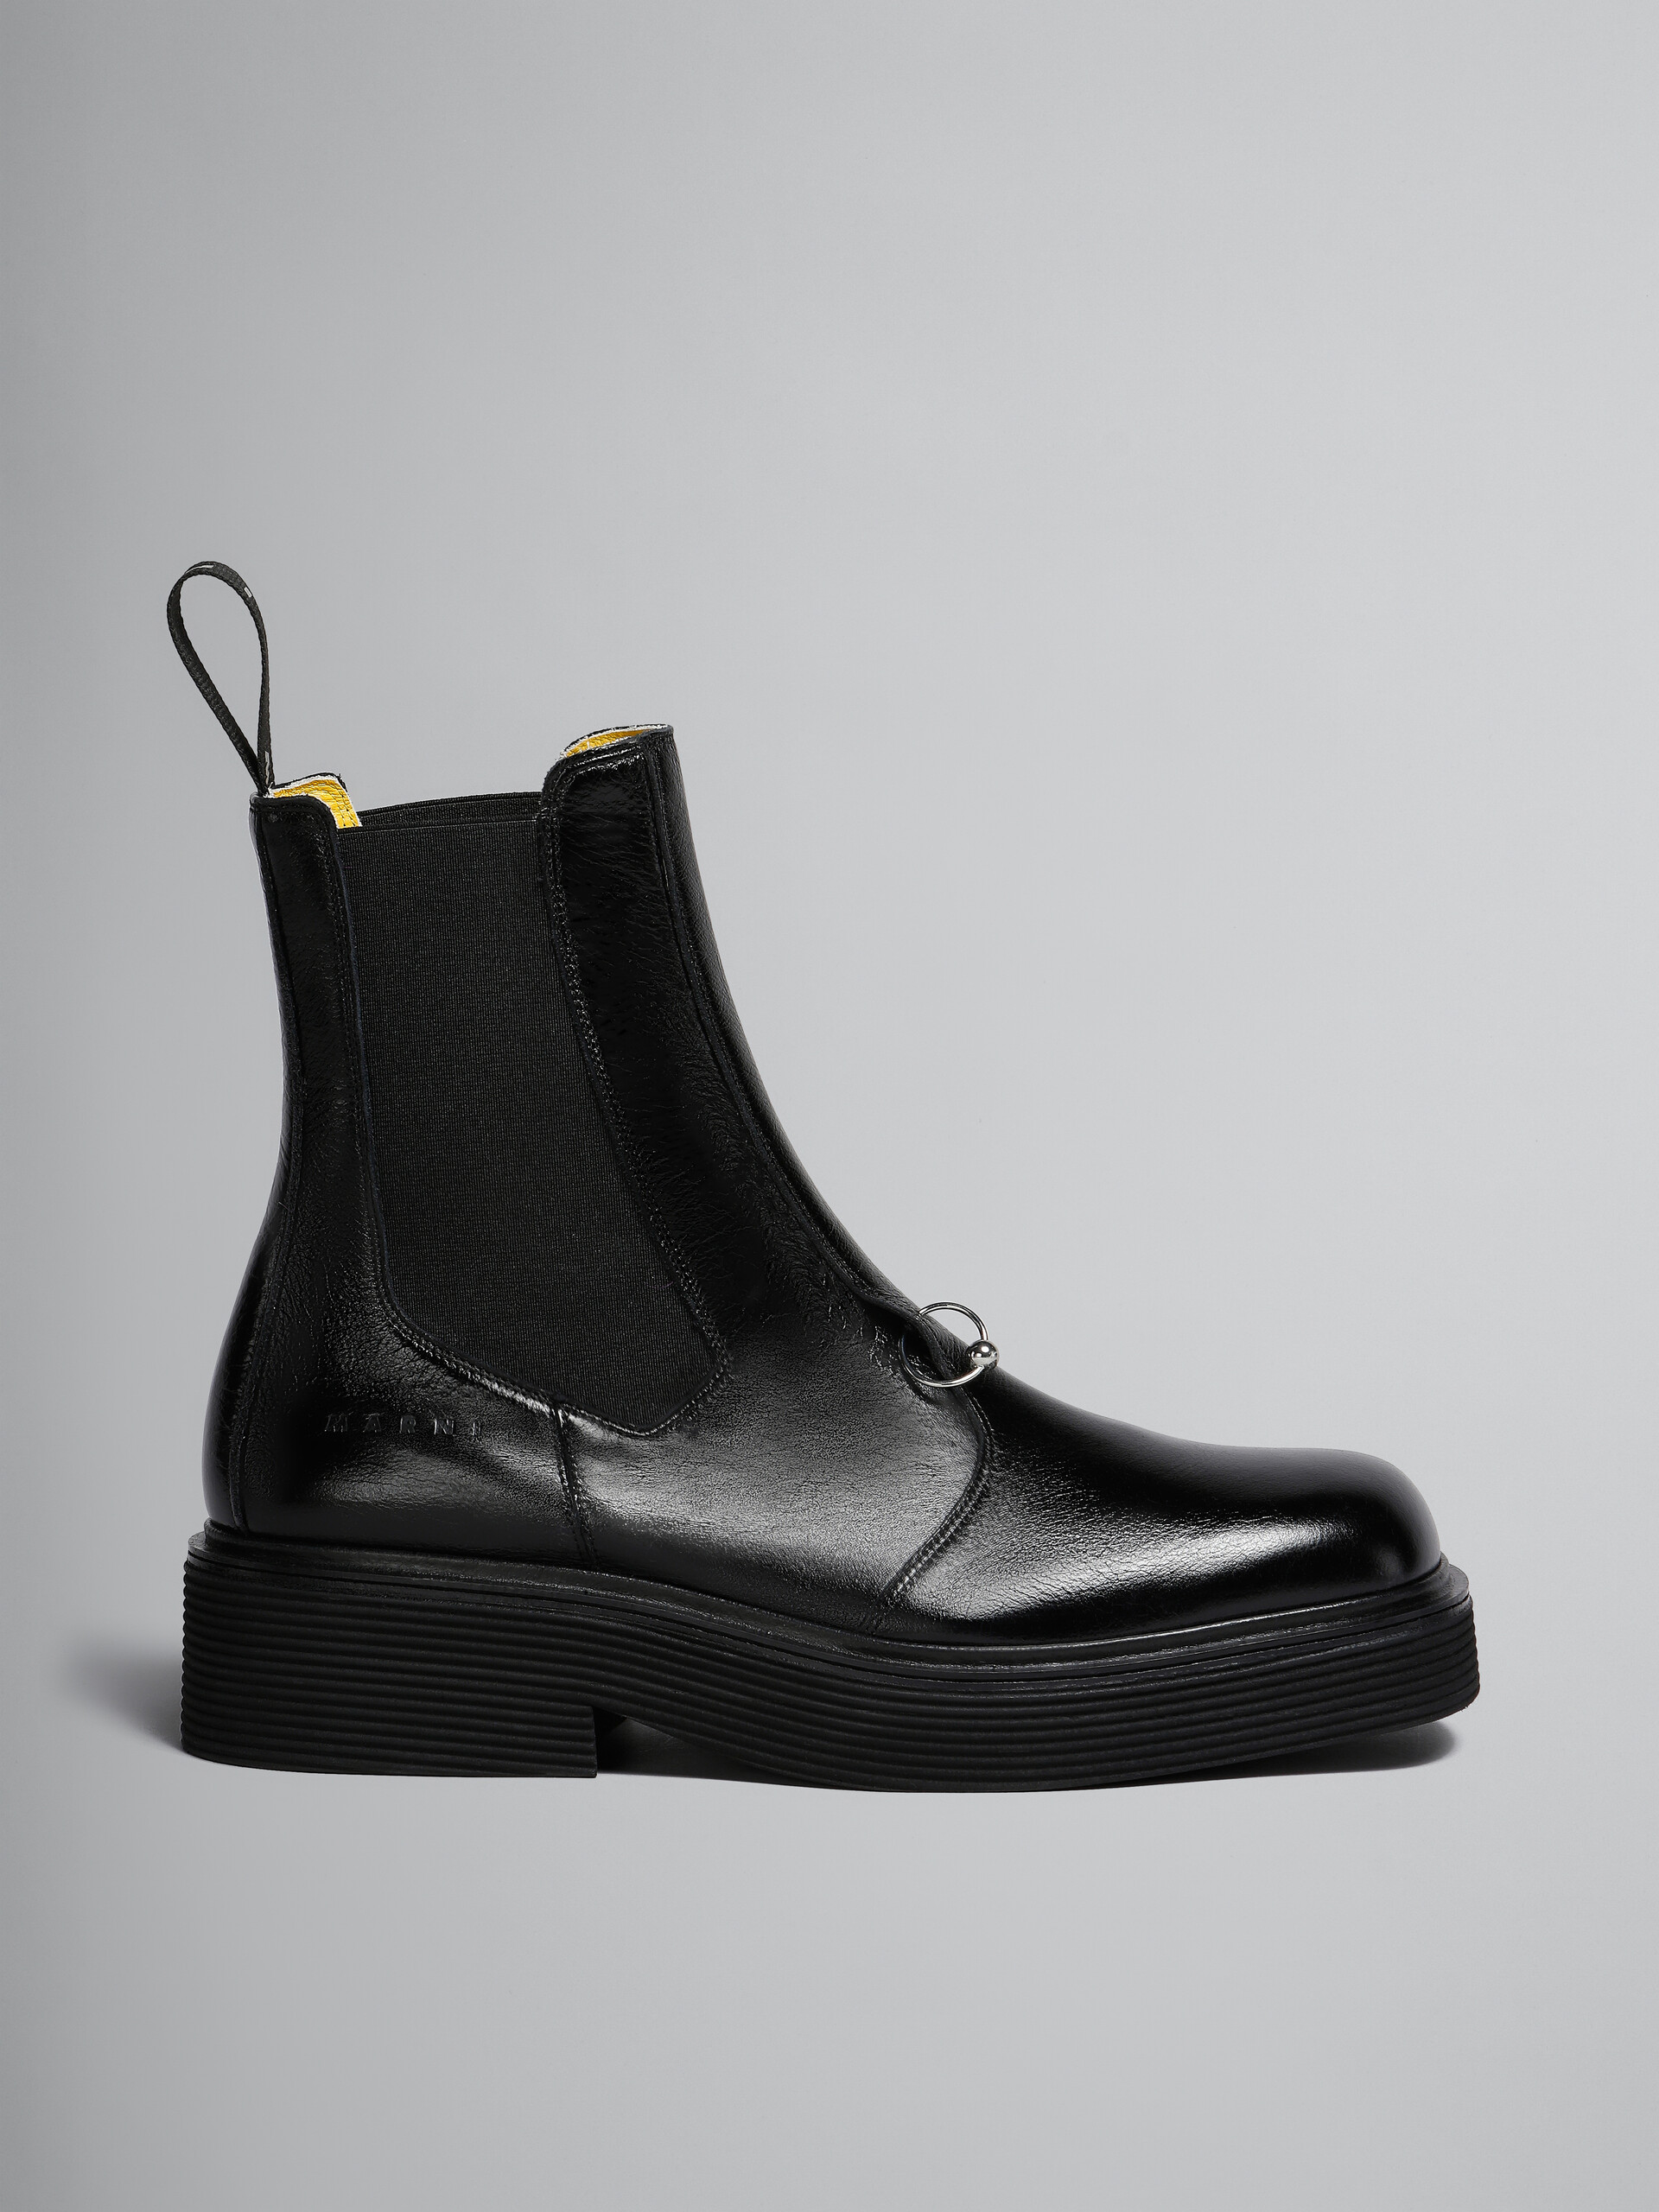 Black leather Chelsea boot - Boots - Image 1